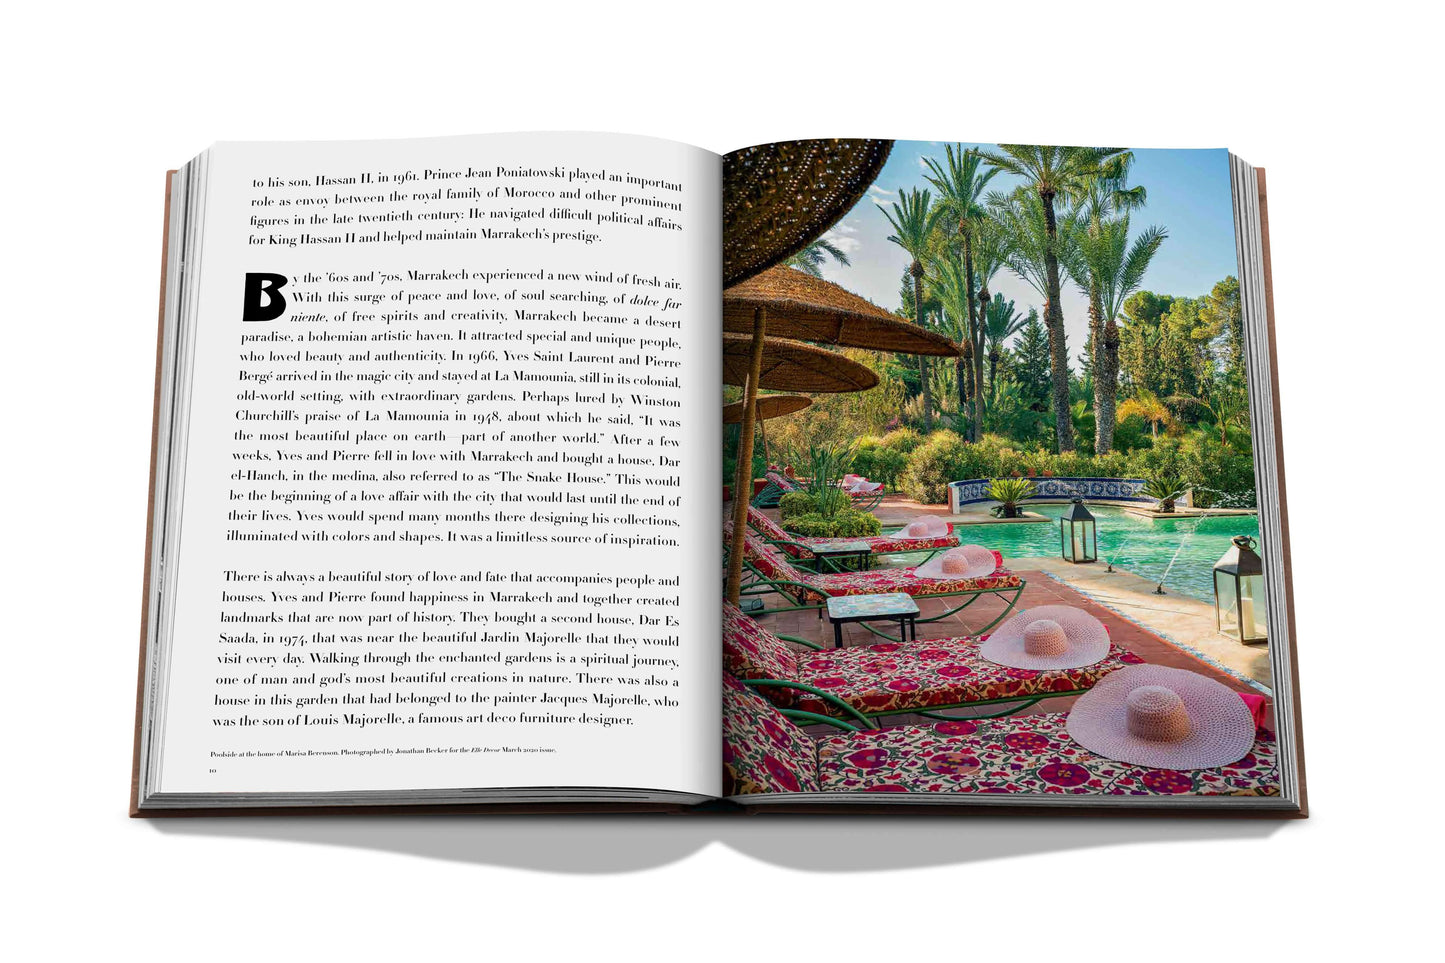 Marrakech Flair Coffee Table Book by Assouline - Haven